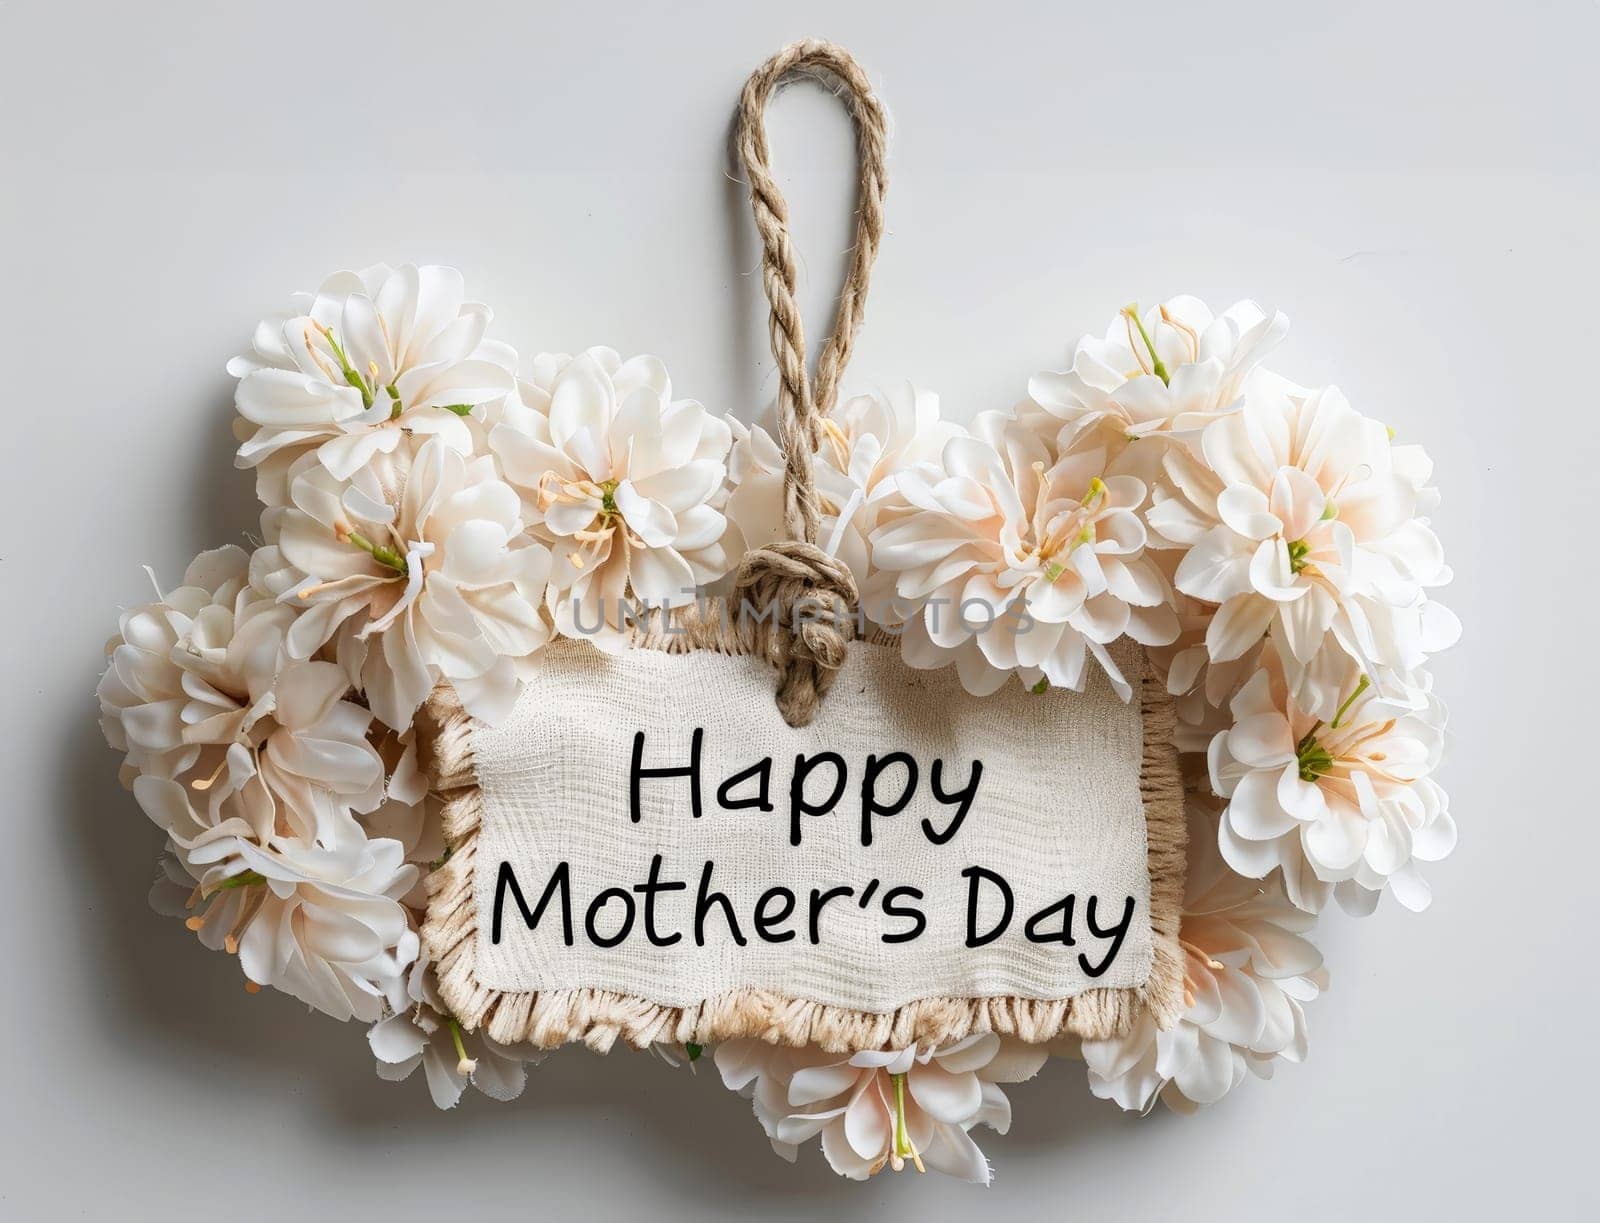 A bouquet of white flowers with a tag that says Happy Mother's Day.